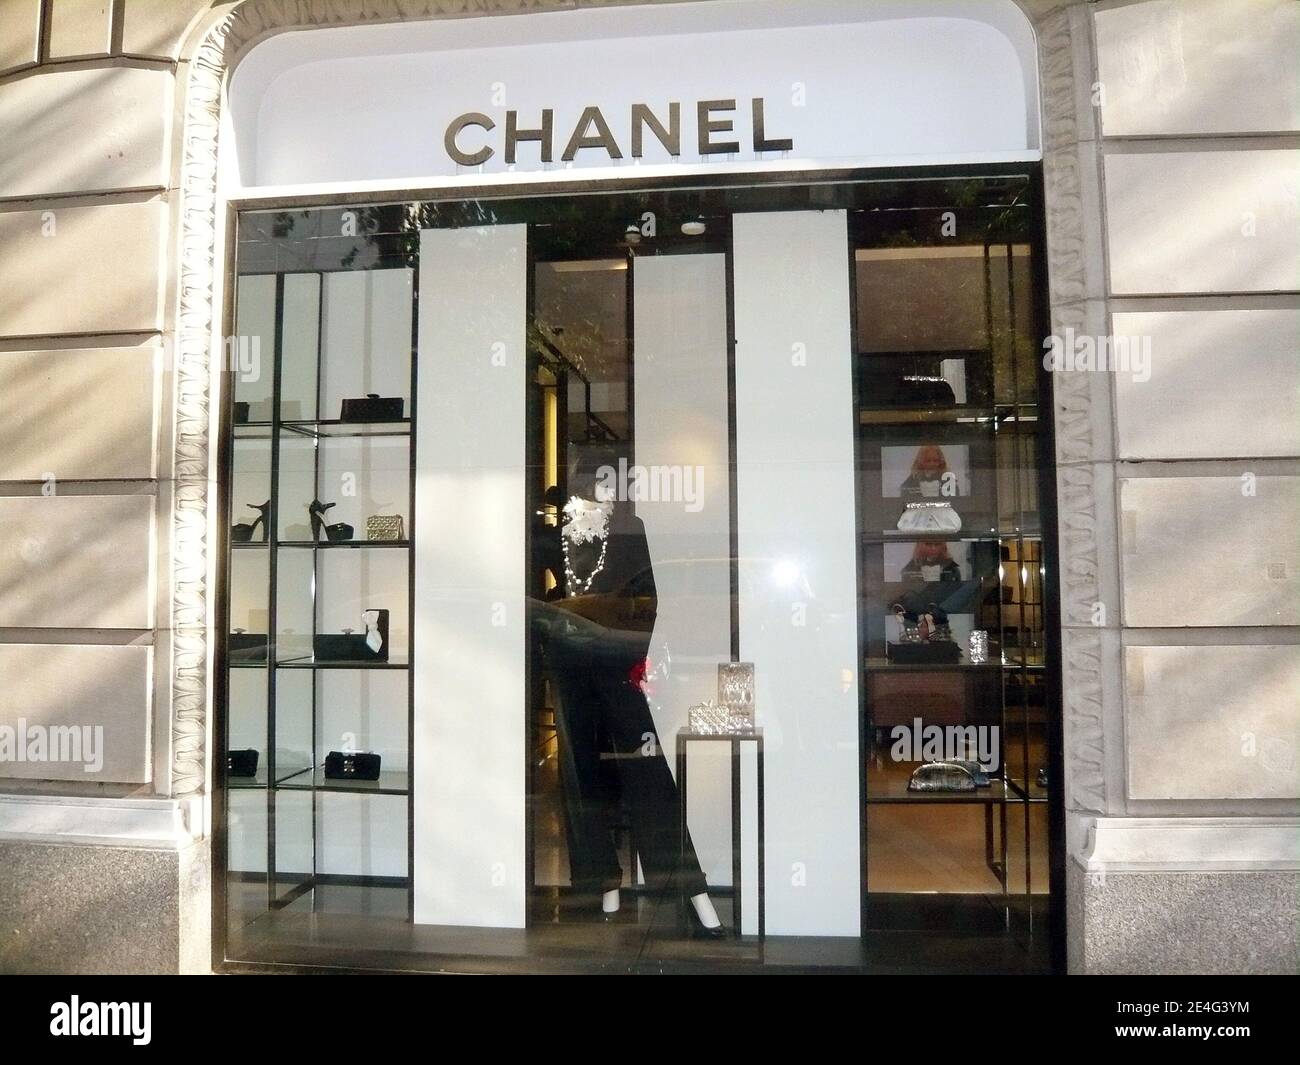 A Lily Allen's model is pictured in the windows of the Chanel store on 57th  Street, styled identically to Allen's ad spread, shot by the Karl Lagerfeld  himself, in New York City,